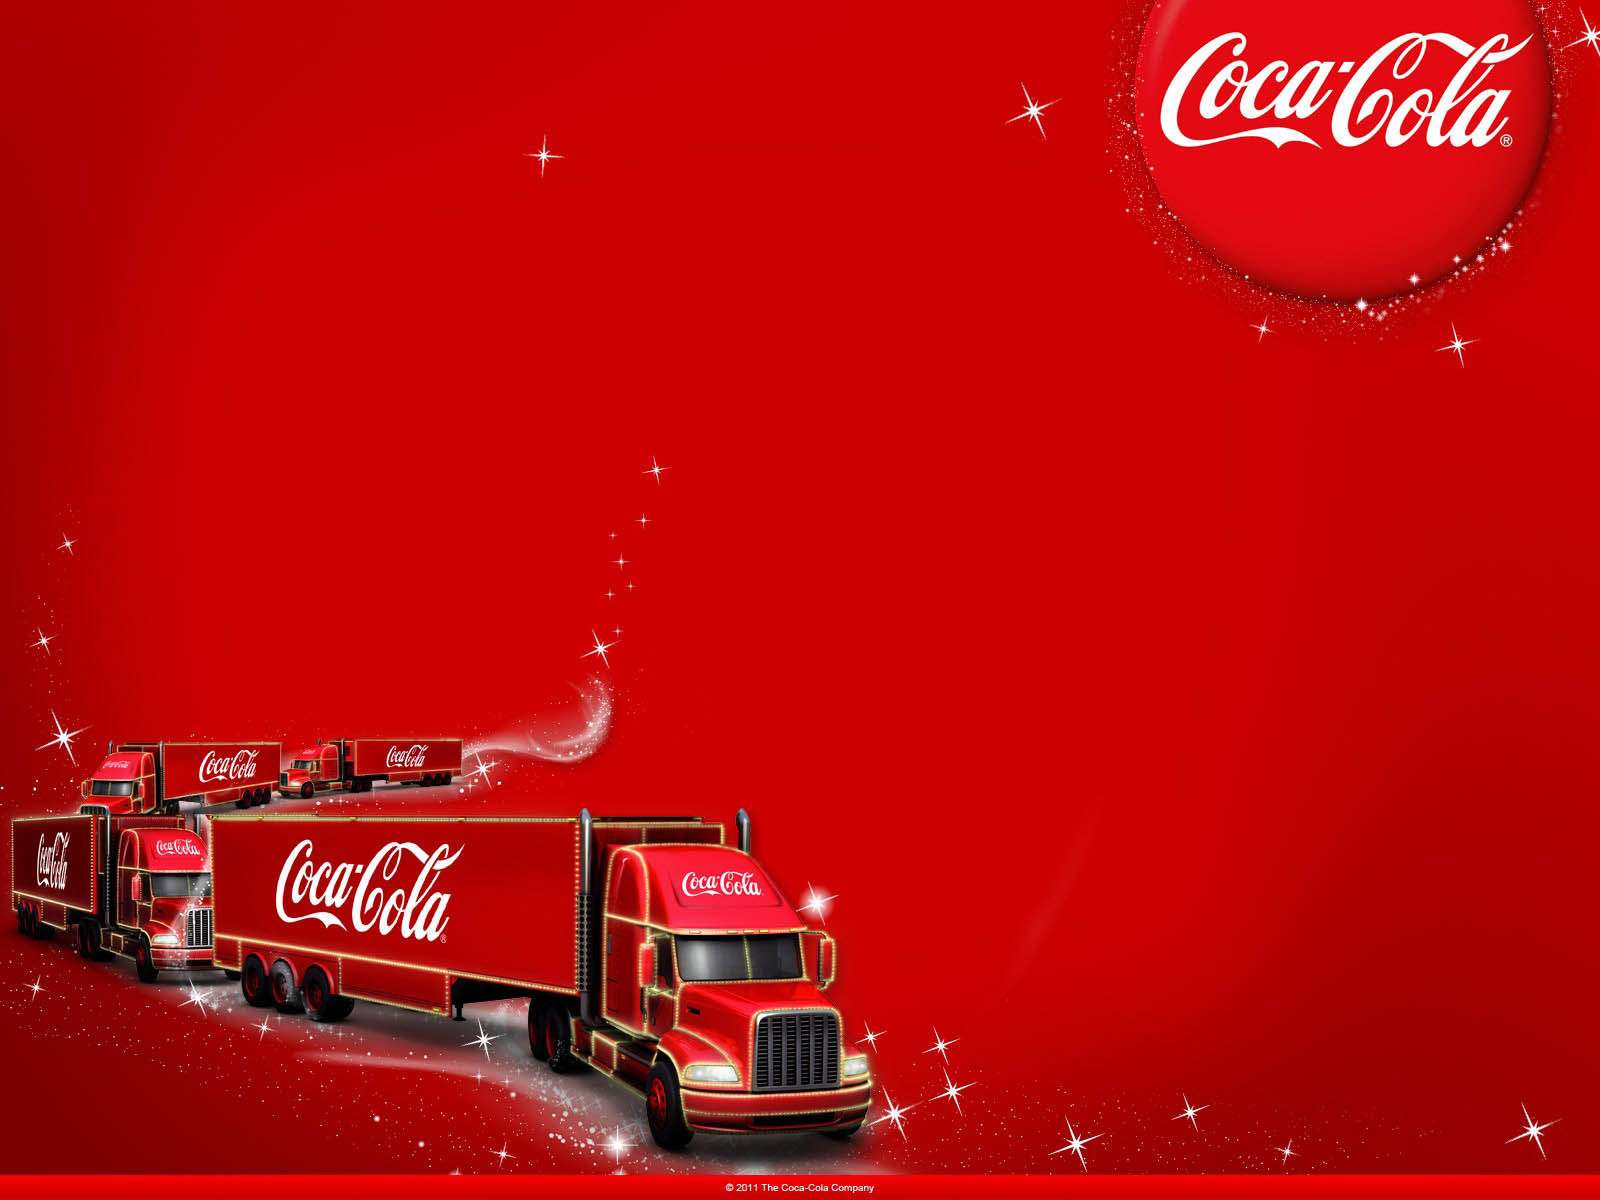 Tag Coca Cola Wallpaper Background Paos Image And Pictures For